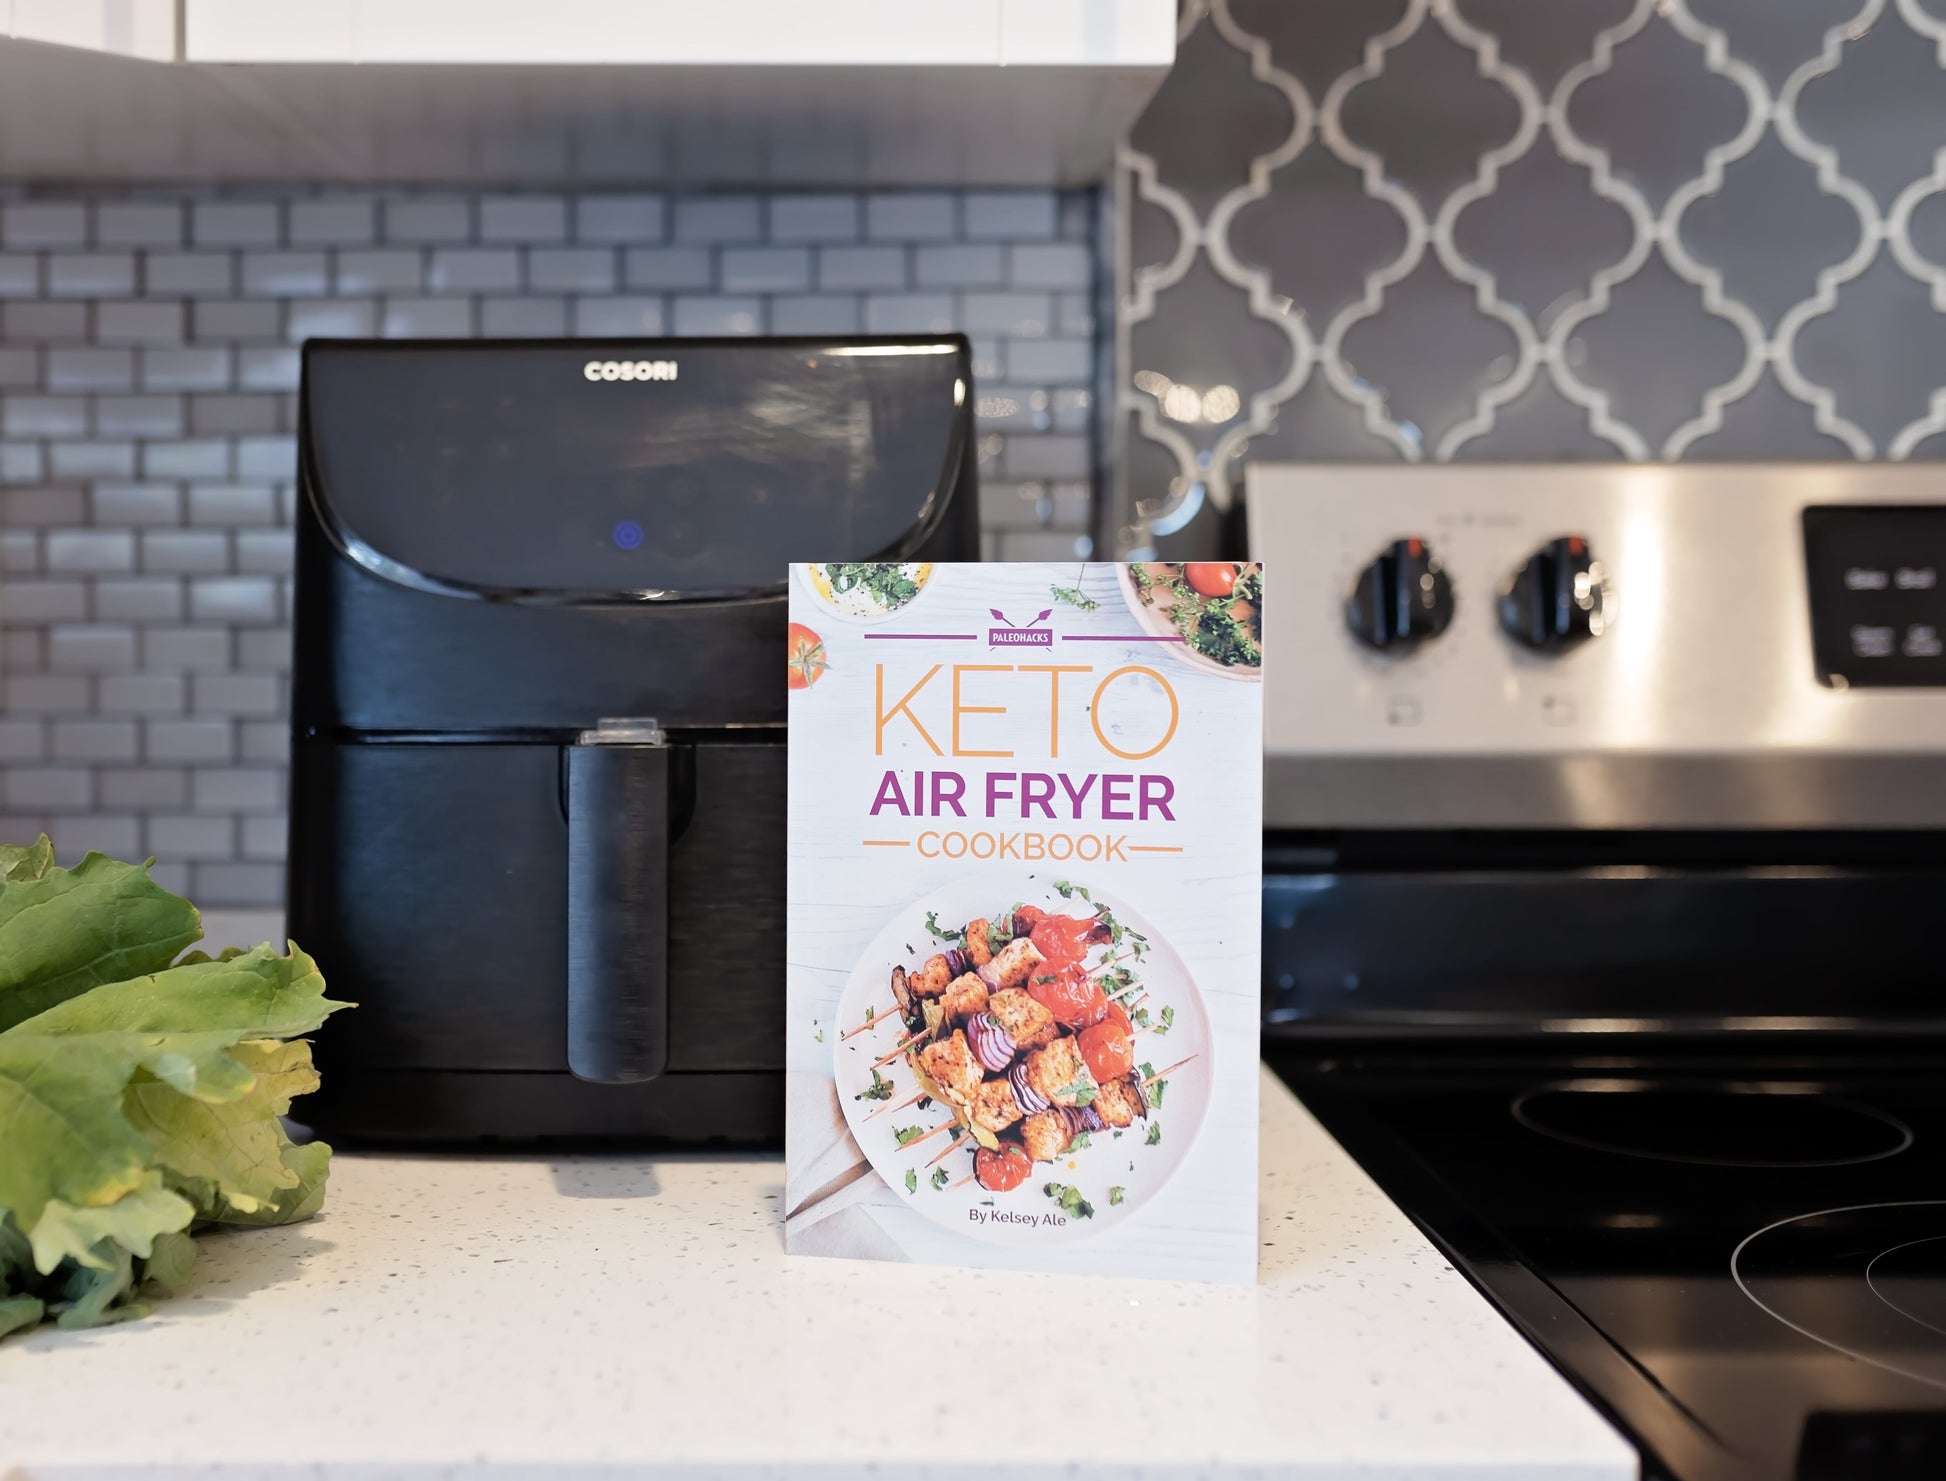 Keto air fryer cookbook leans against an air fryer and a stove.